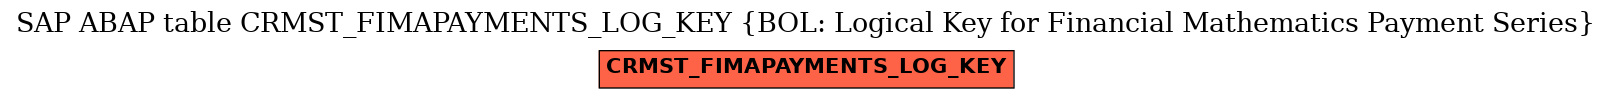 E-R Diagram for table CRMST_FIMAPAYMENTS_LOG_KEY (BOL: Logical Key for Financial Mathematics Payment Series)